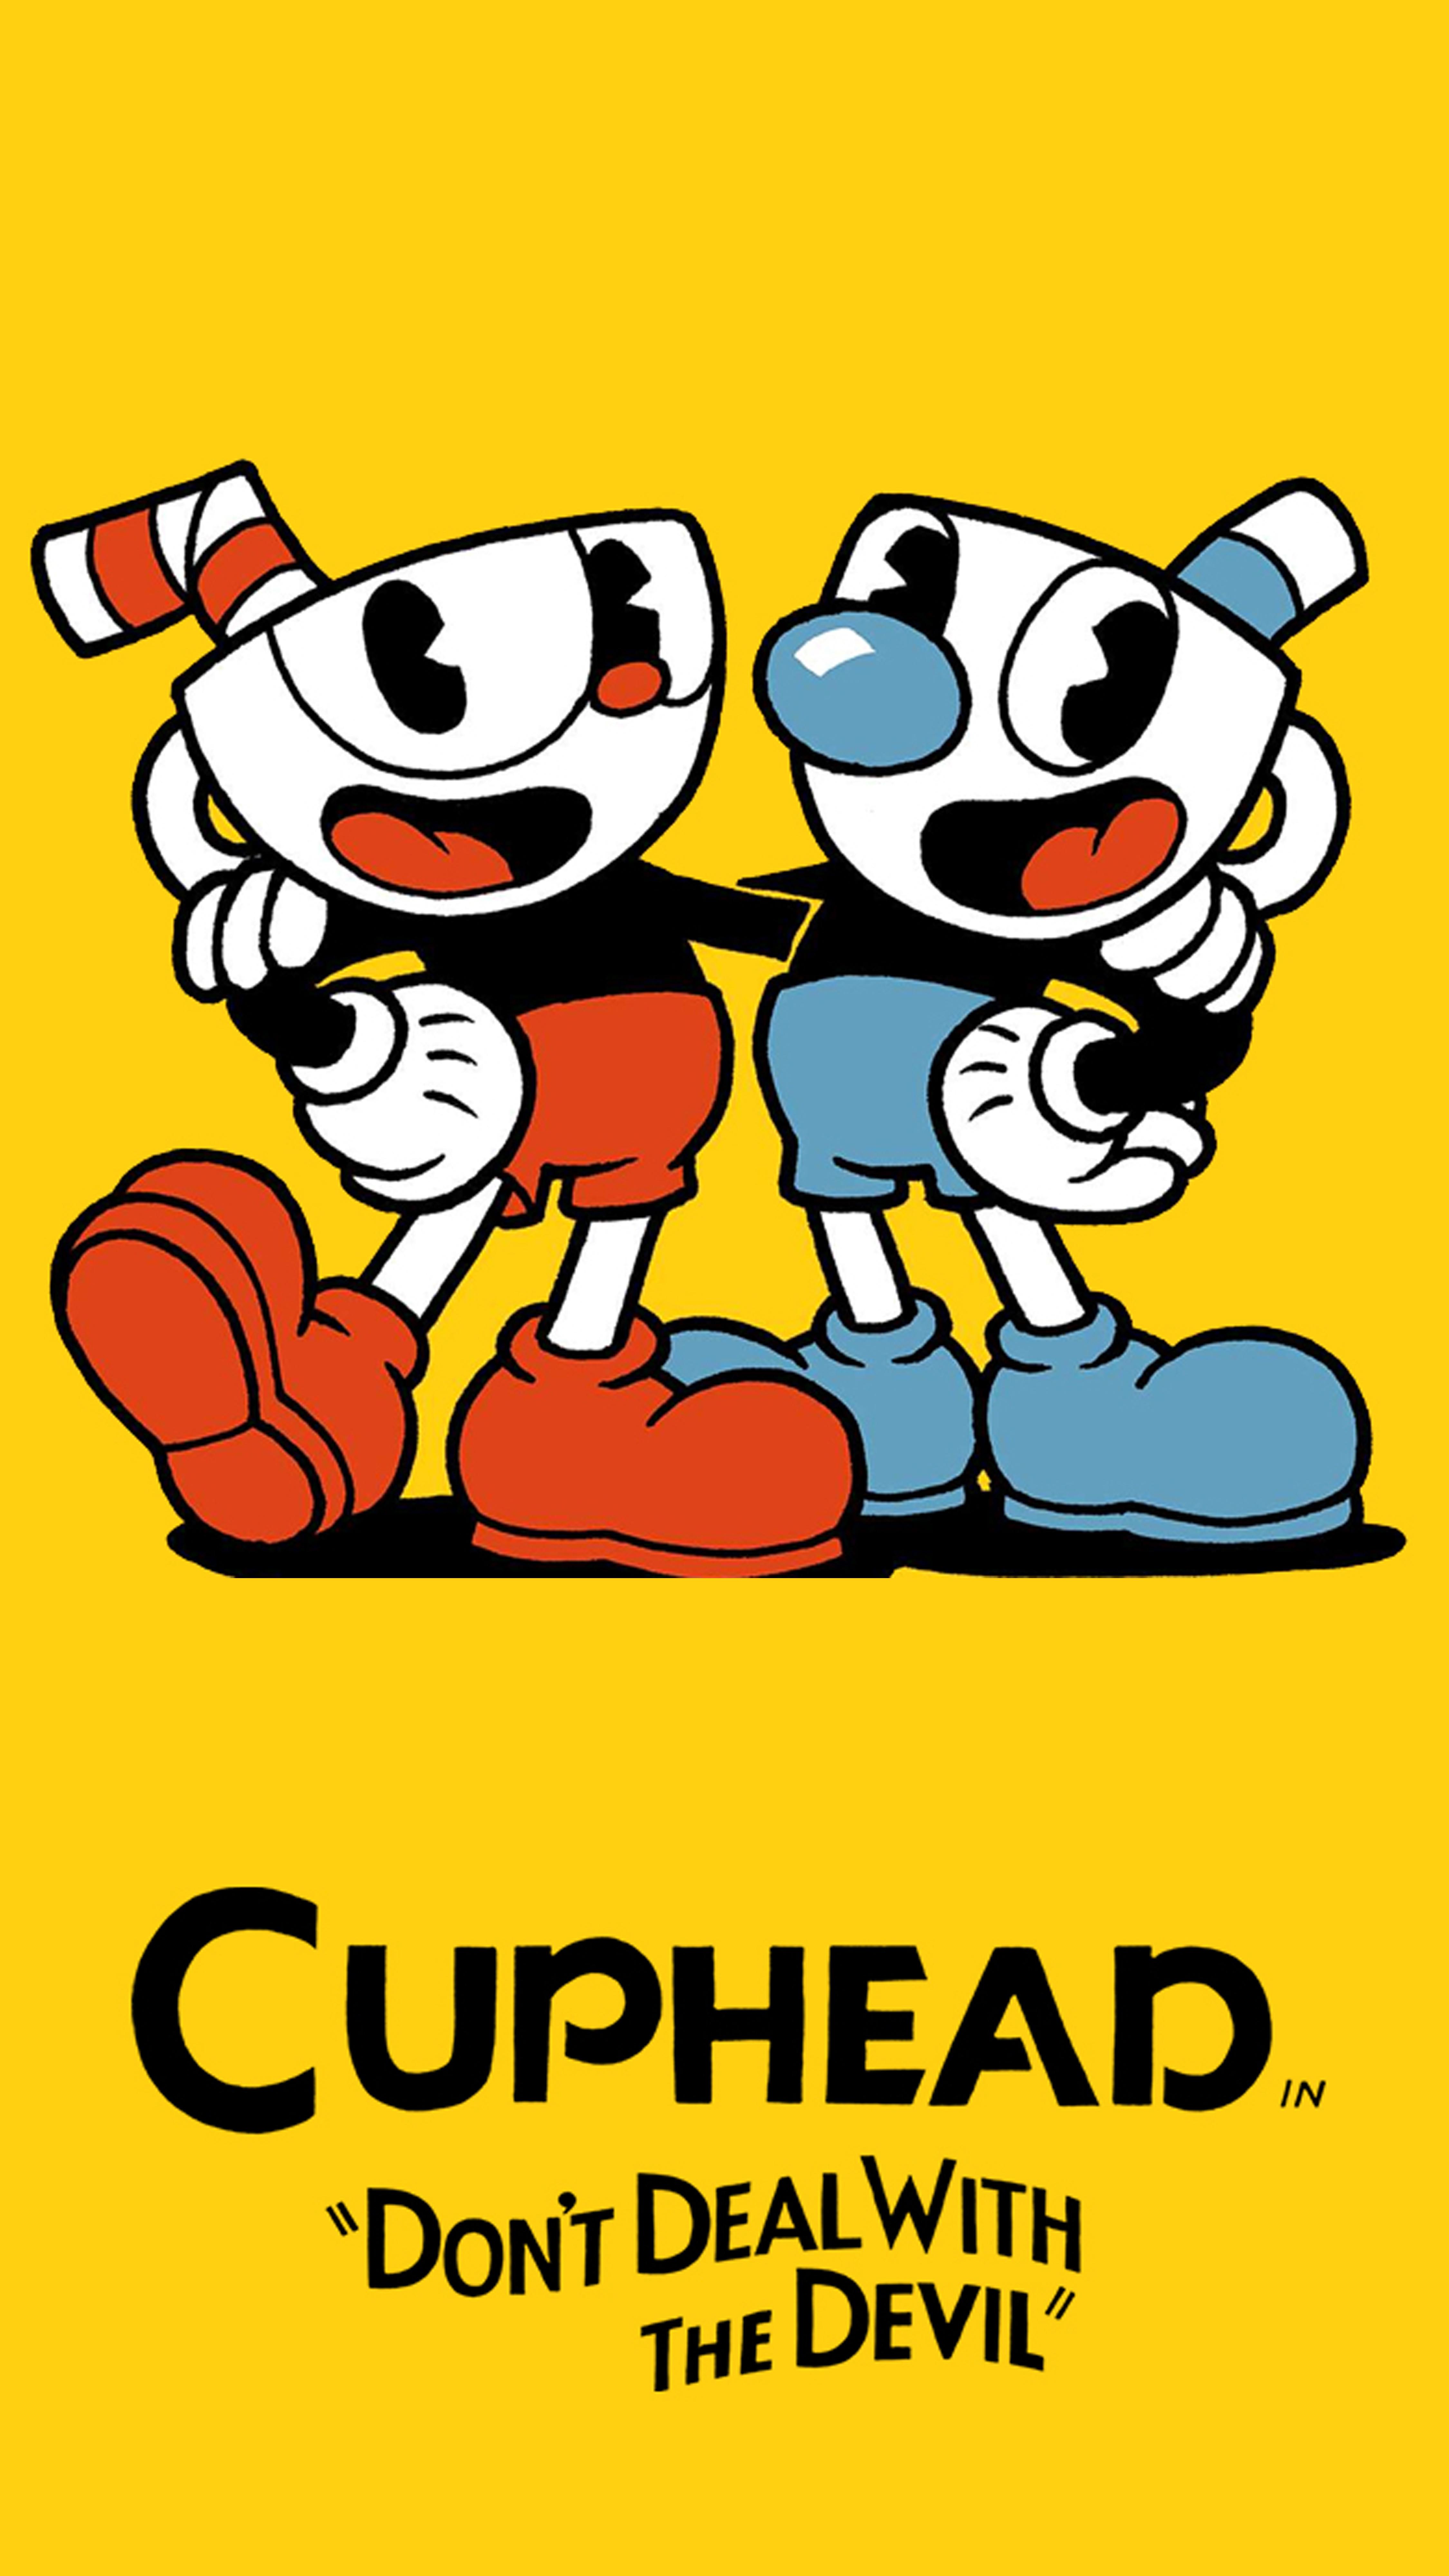 Here Is A Cuphead Phone Wallpaper I Threw Together In